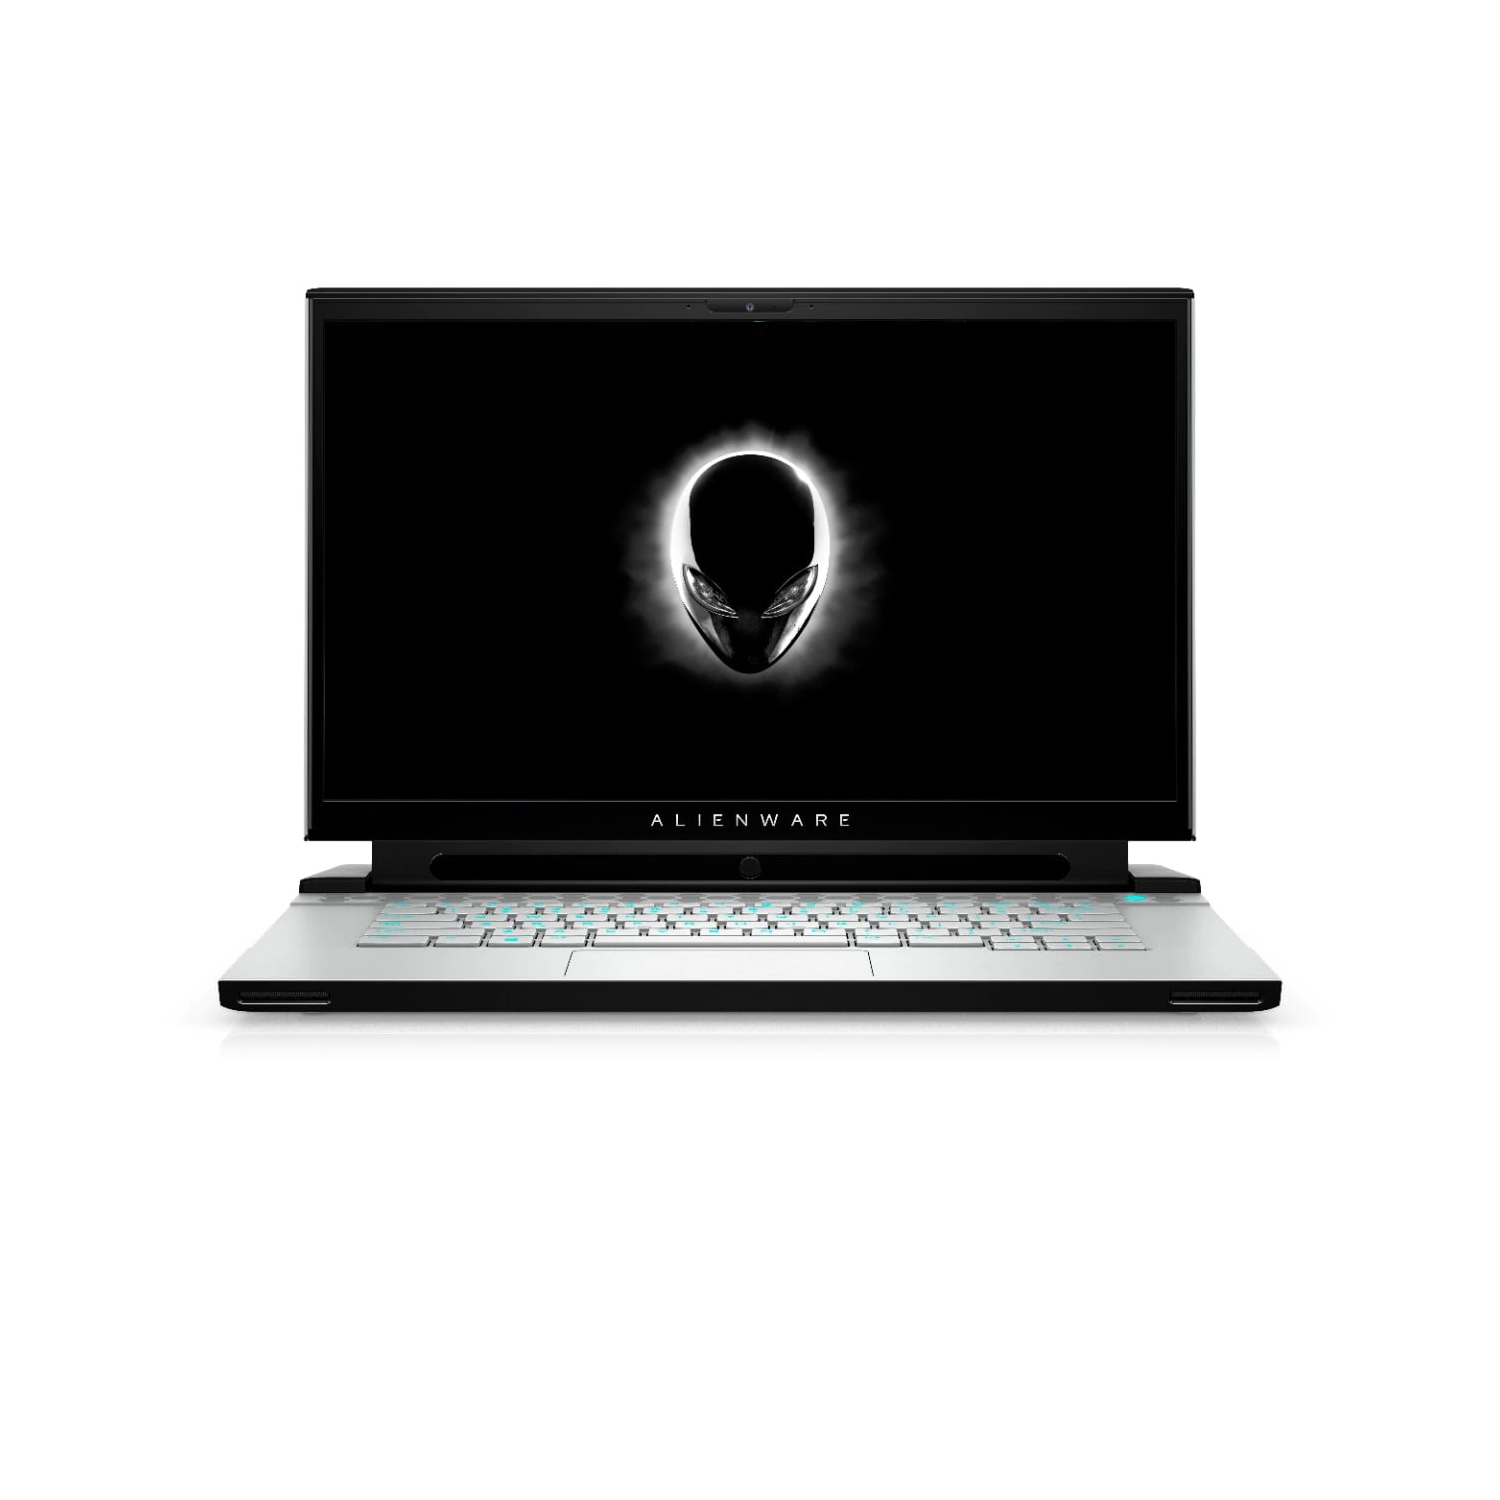 Refurbished (Excellent) - Dell Alienware m15 R3 Gaming Laptop (2020), 15.6" FHD, Core i7 - 2TB SSD + 512GB SSD - 32GB RAM - 2070 Super, 5.1 GHz - 10th Gen CPU Certified